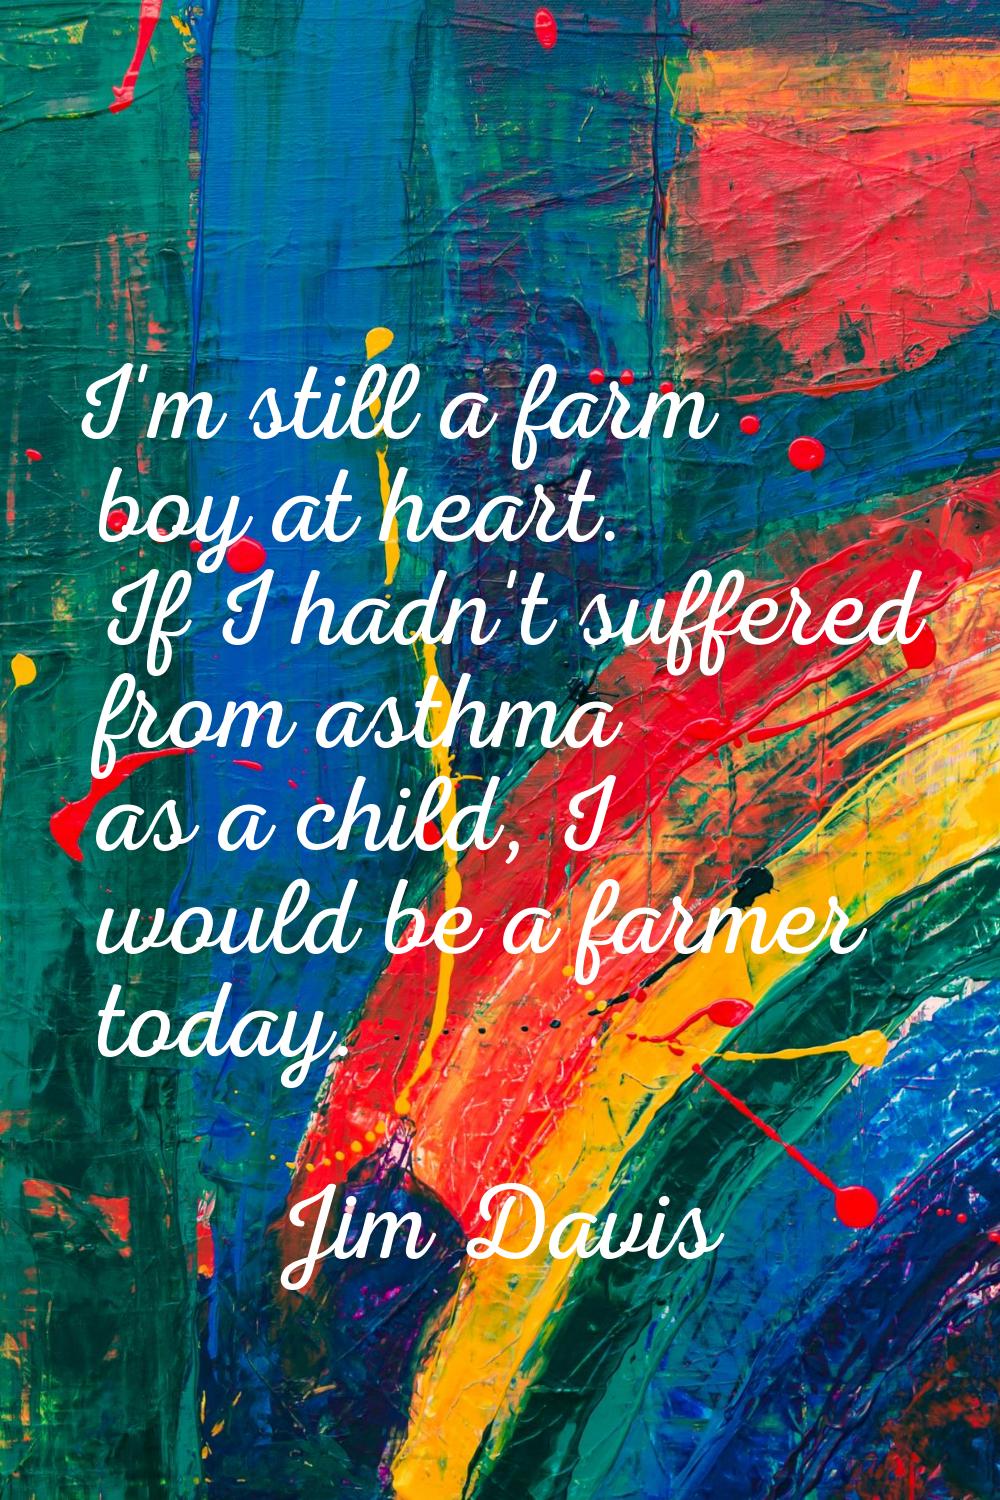 I'm still a farm boy at heart. If I hadn't suffered from asthma as a child, I would be a farmer tod